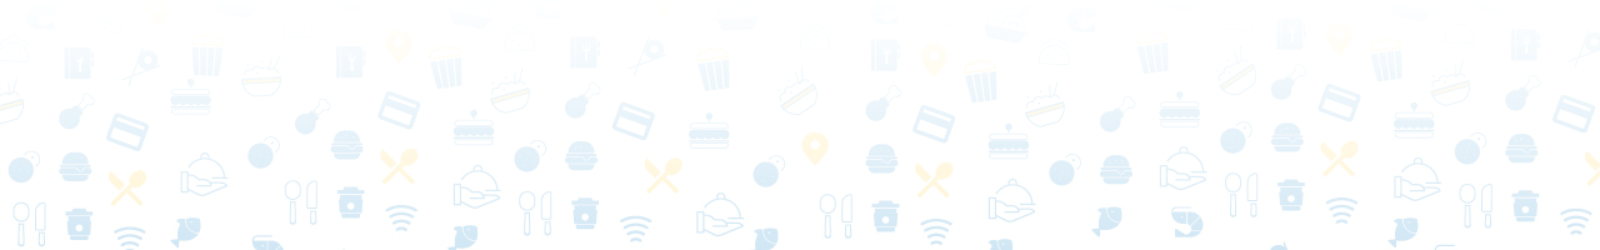 decorative footer featuring icons of different types of food